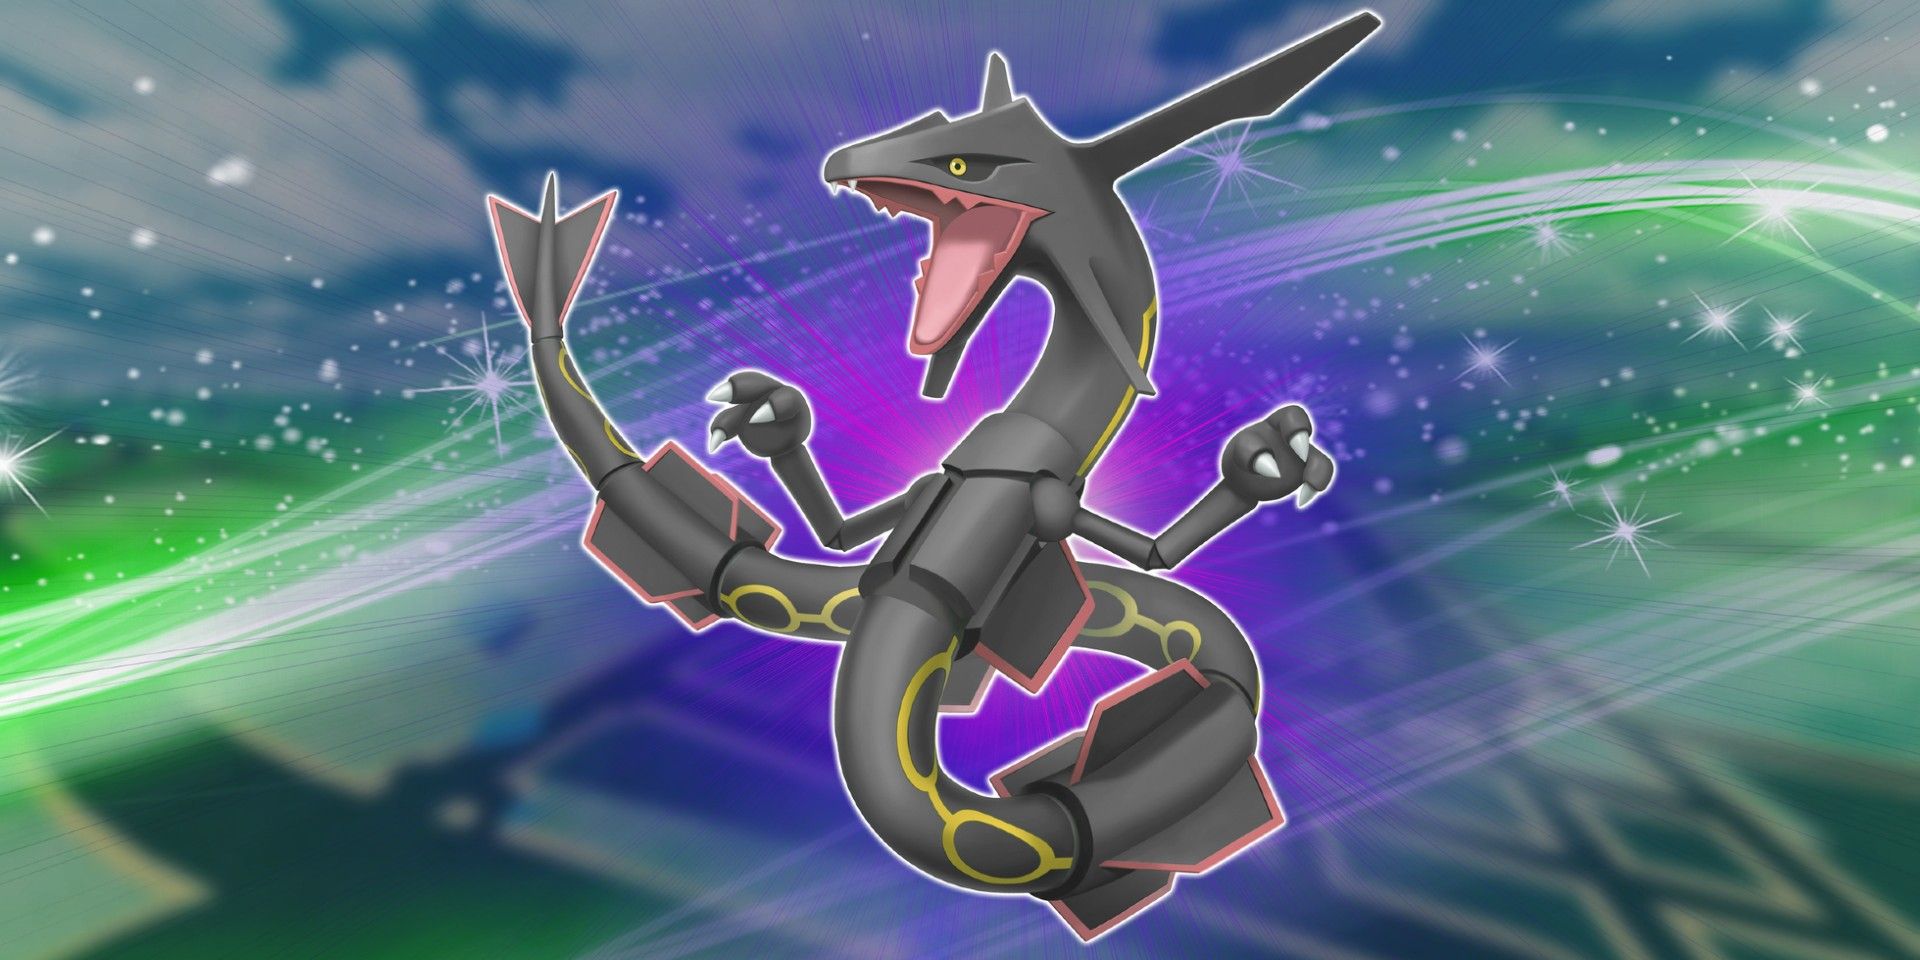 Rayquaza is shiny with a purple backlit and behind it is a green flow of energy, and in the background, a blurred image of the Pokémon GO map.